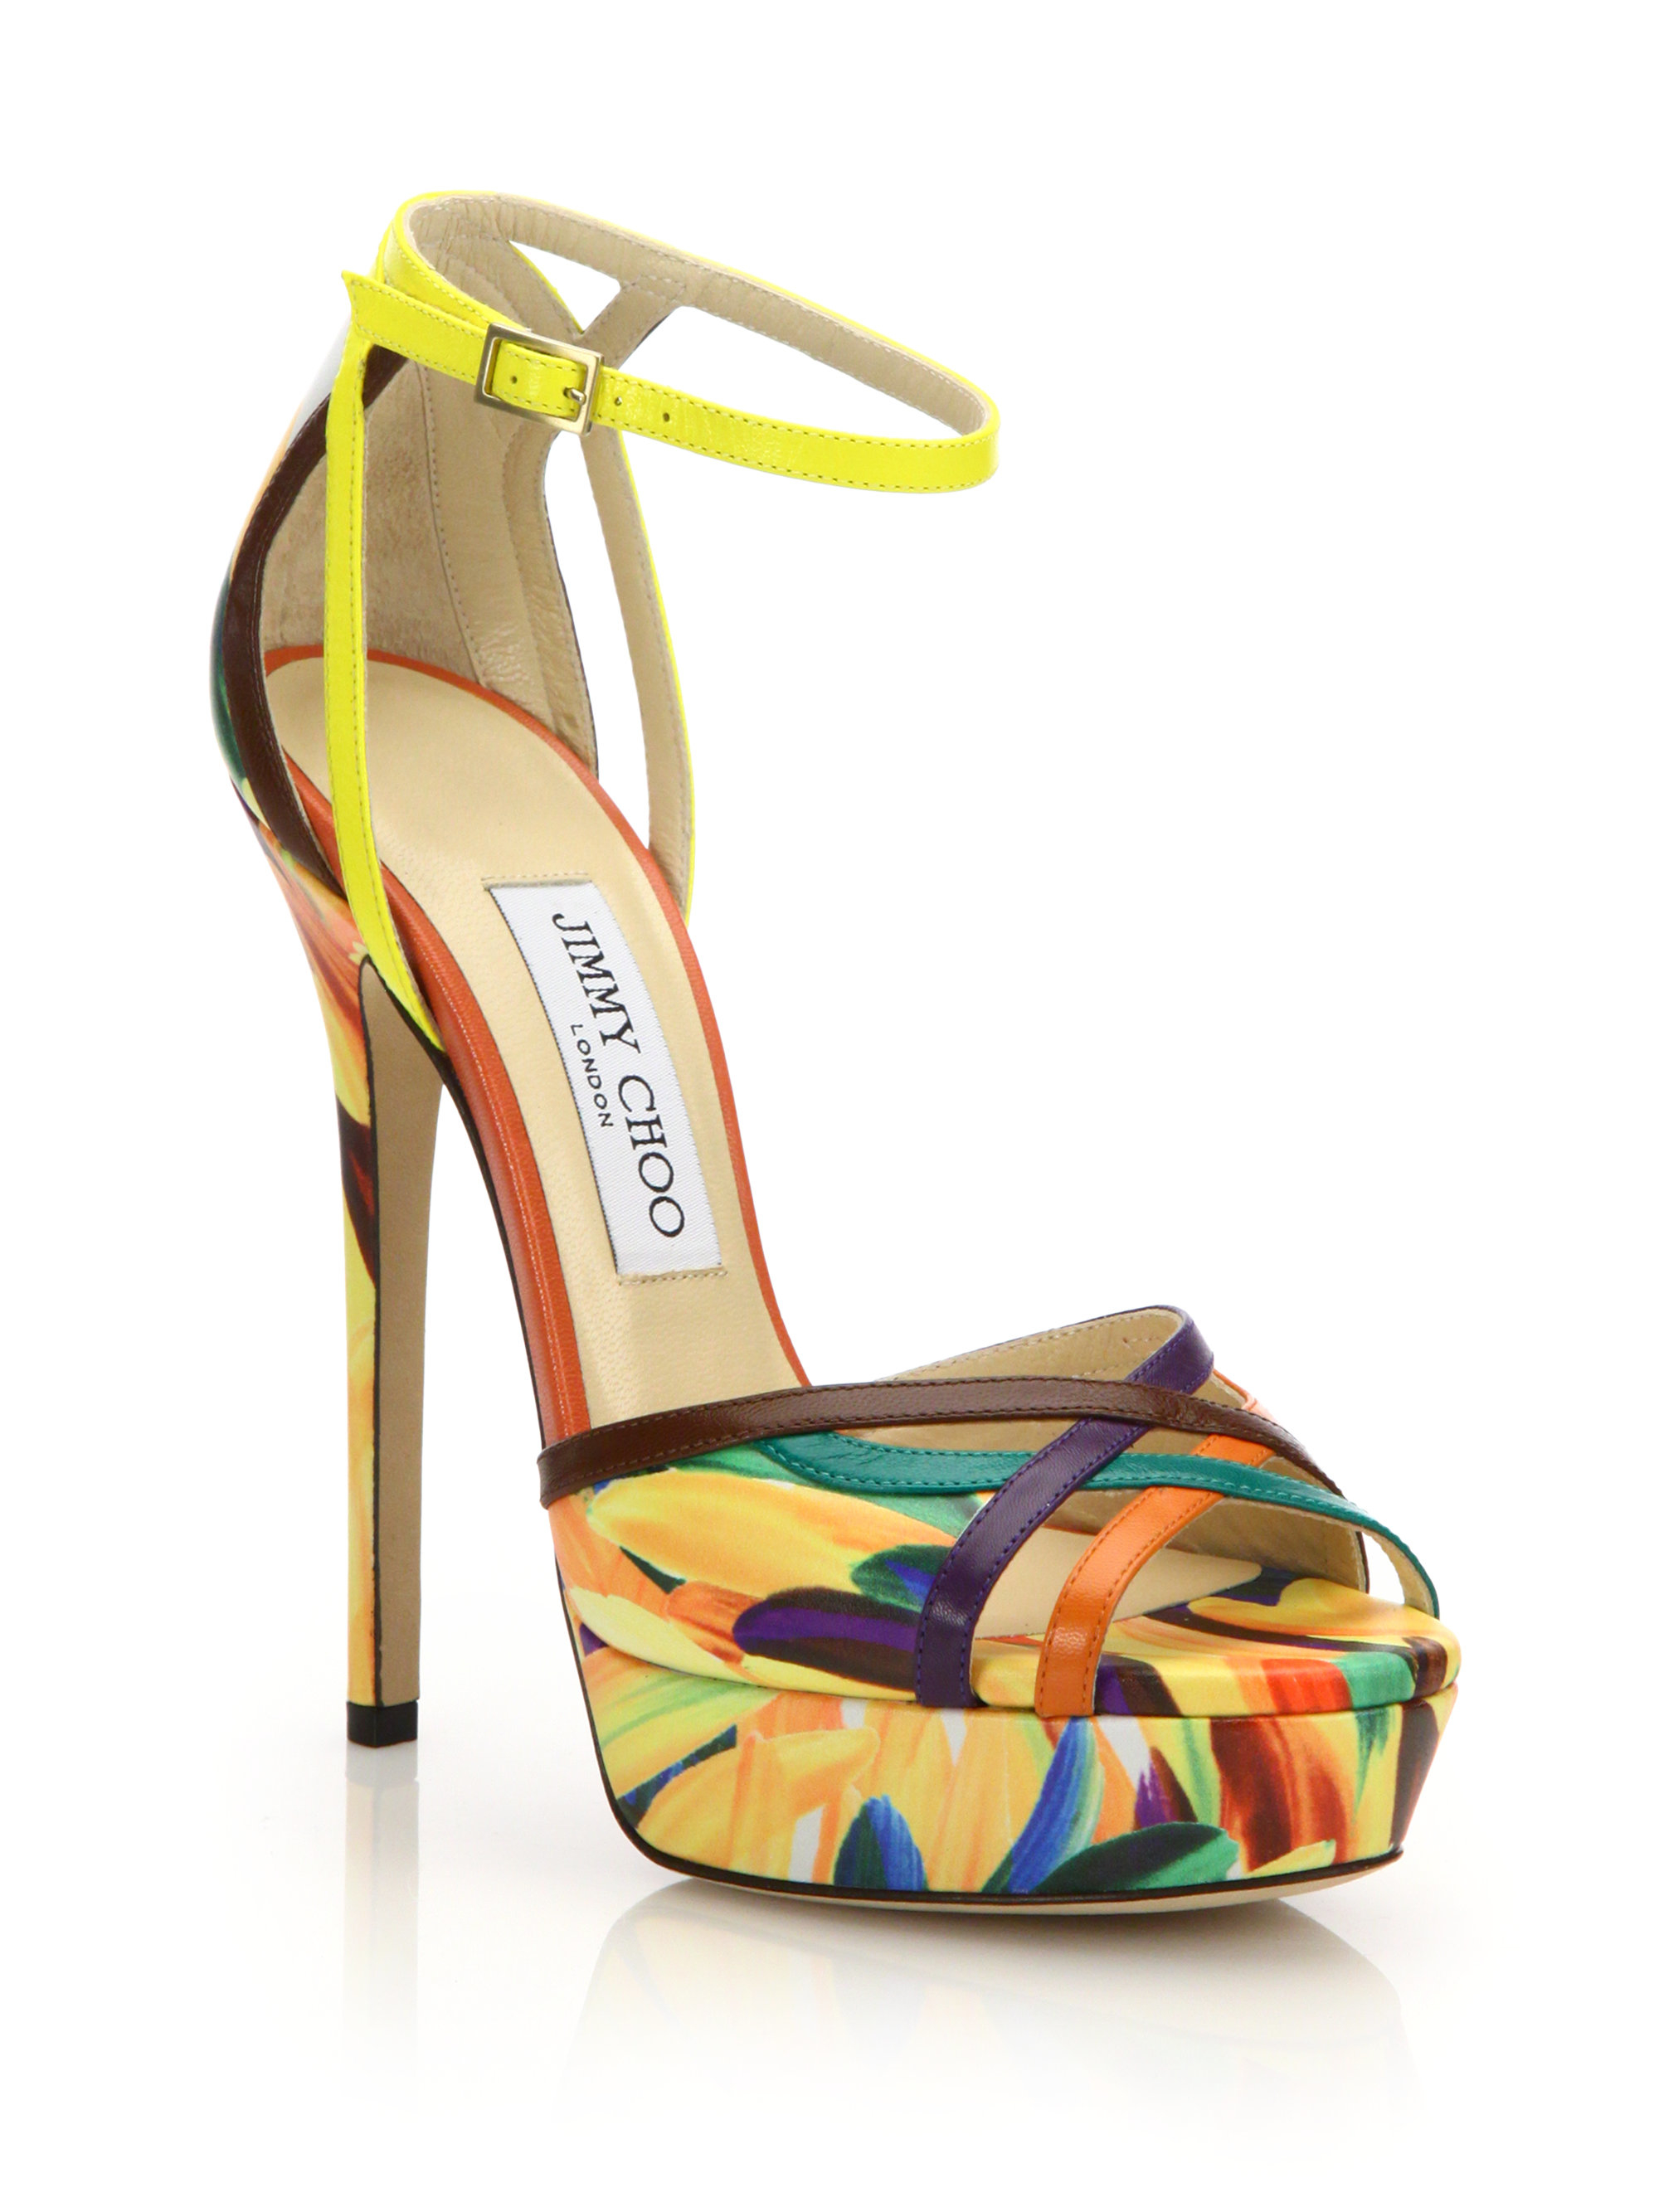 Lyst - Jimmy Choo Laurita Feather-print Leather Platform Sandals in Yellow